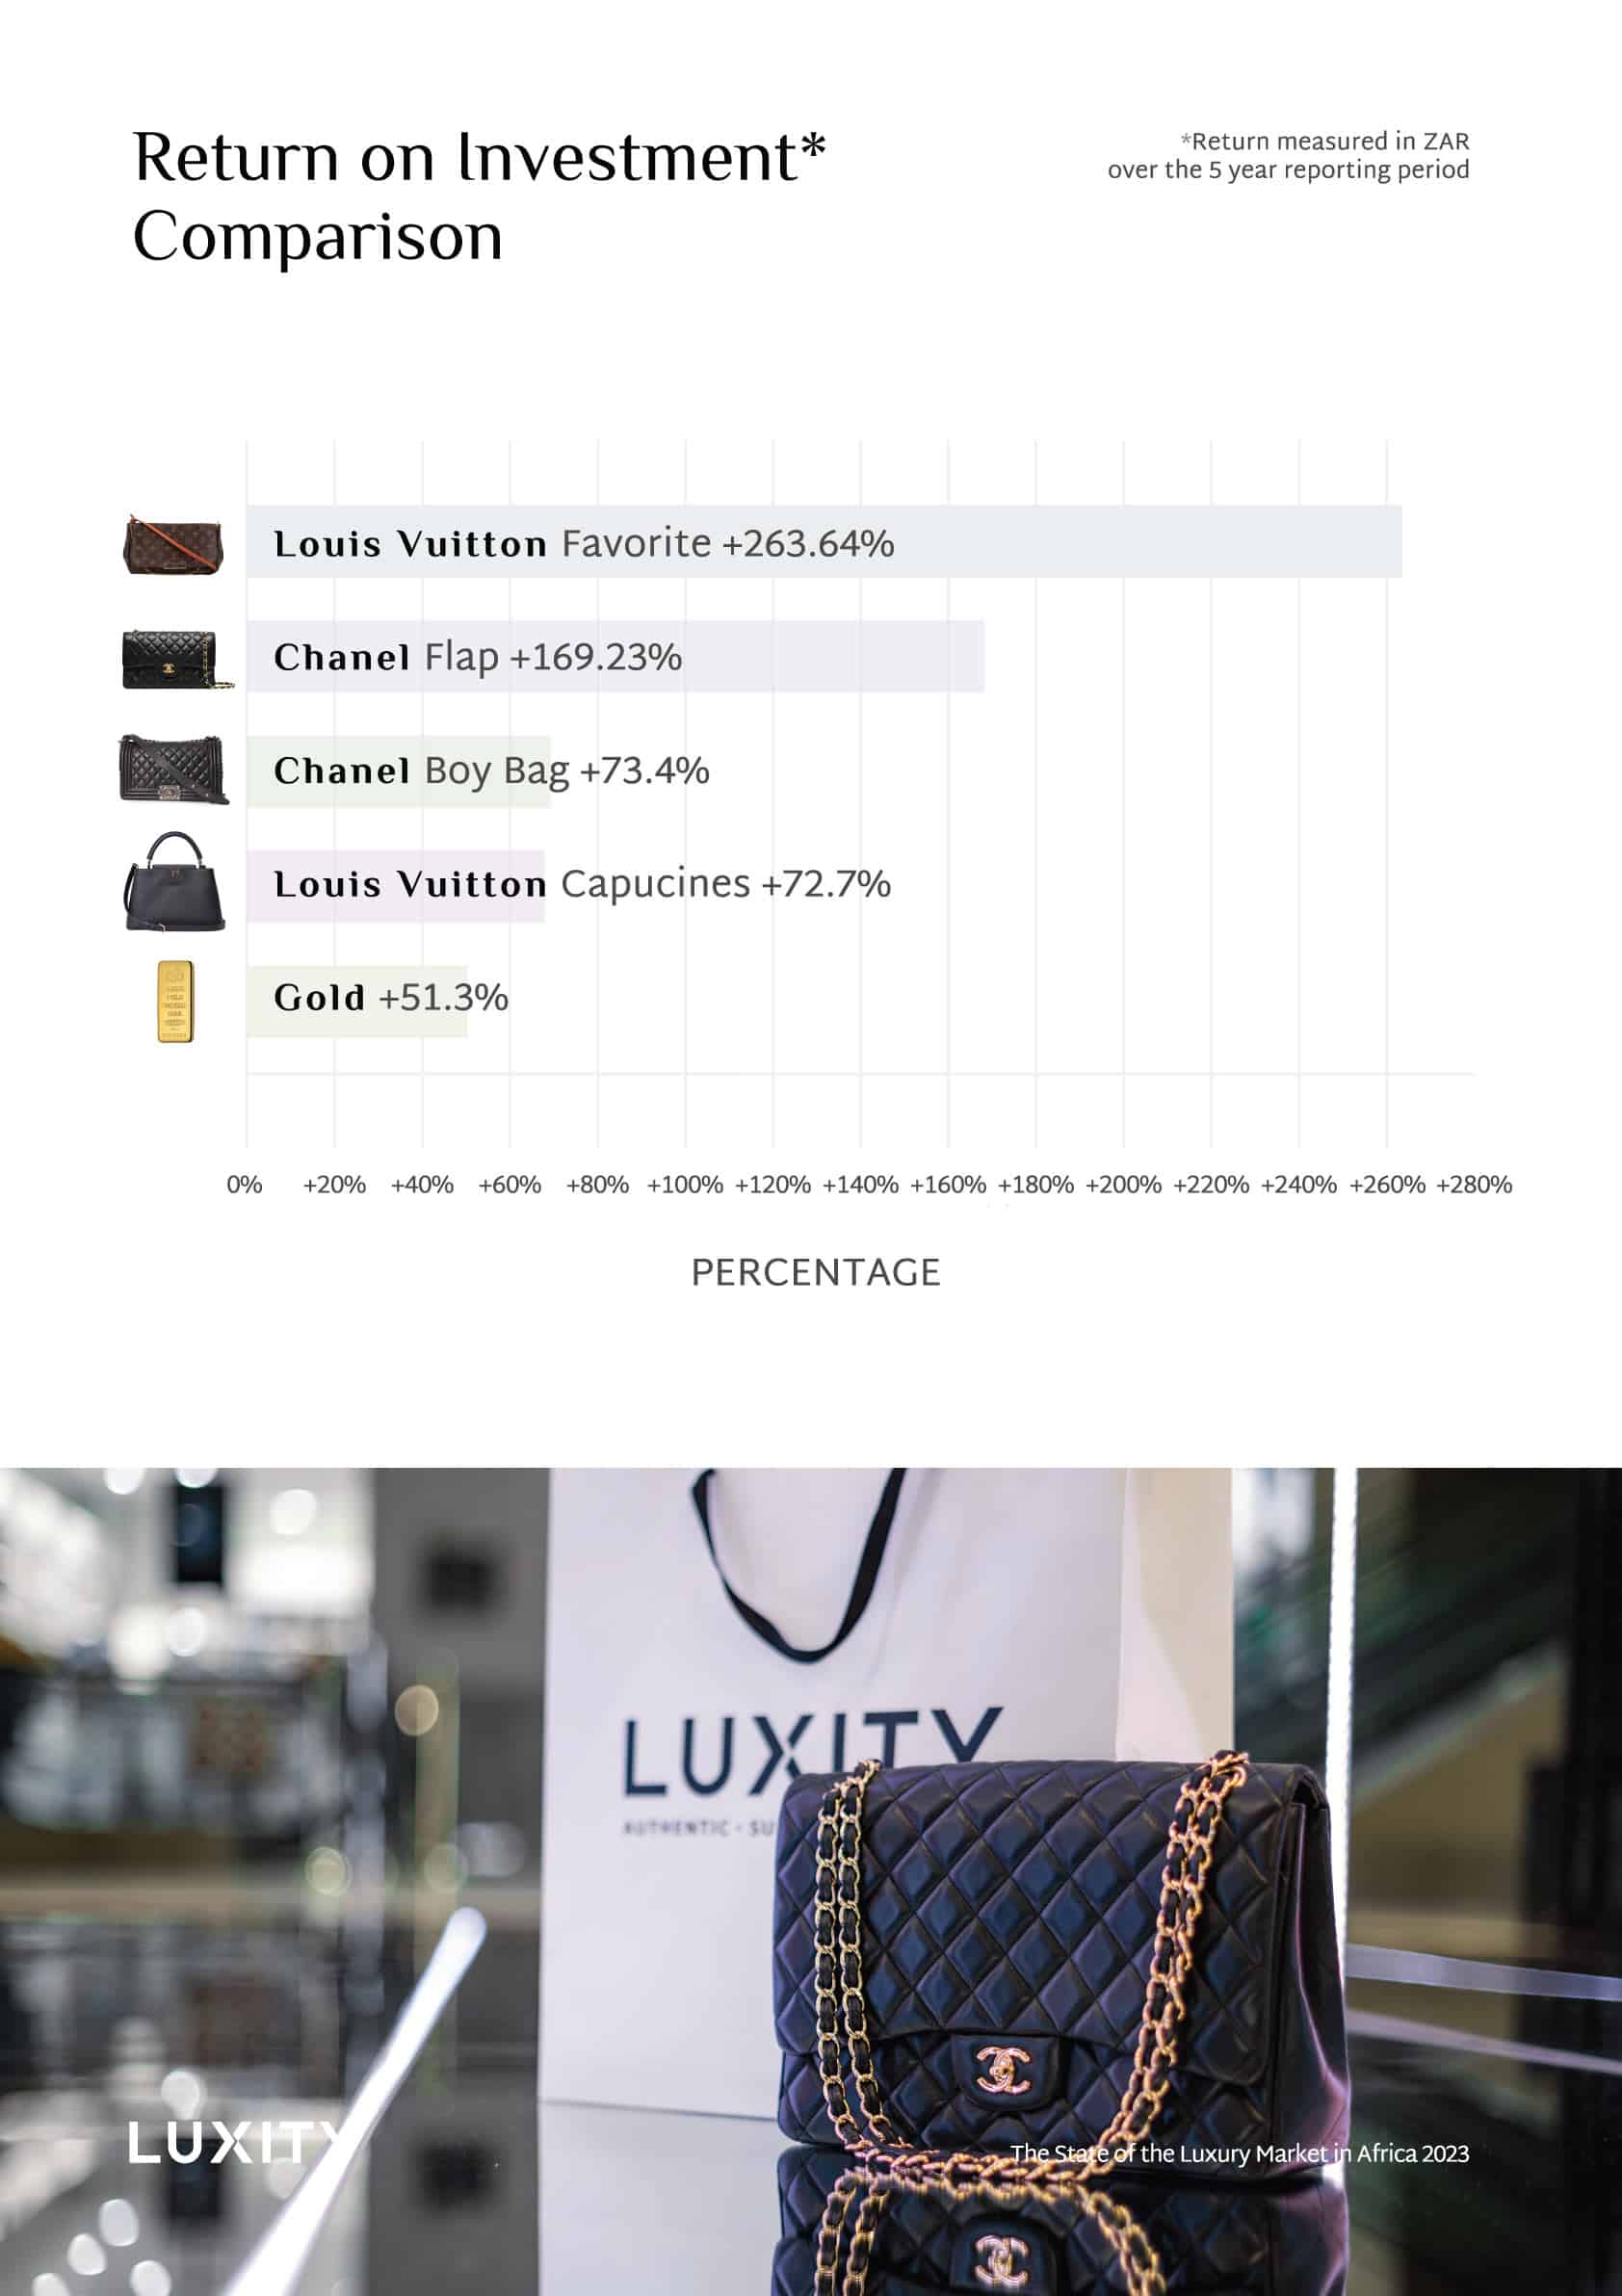 The state of the luxury goods market in Africa: Why Louis Vuitton